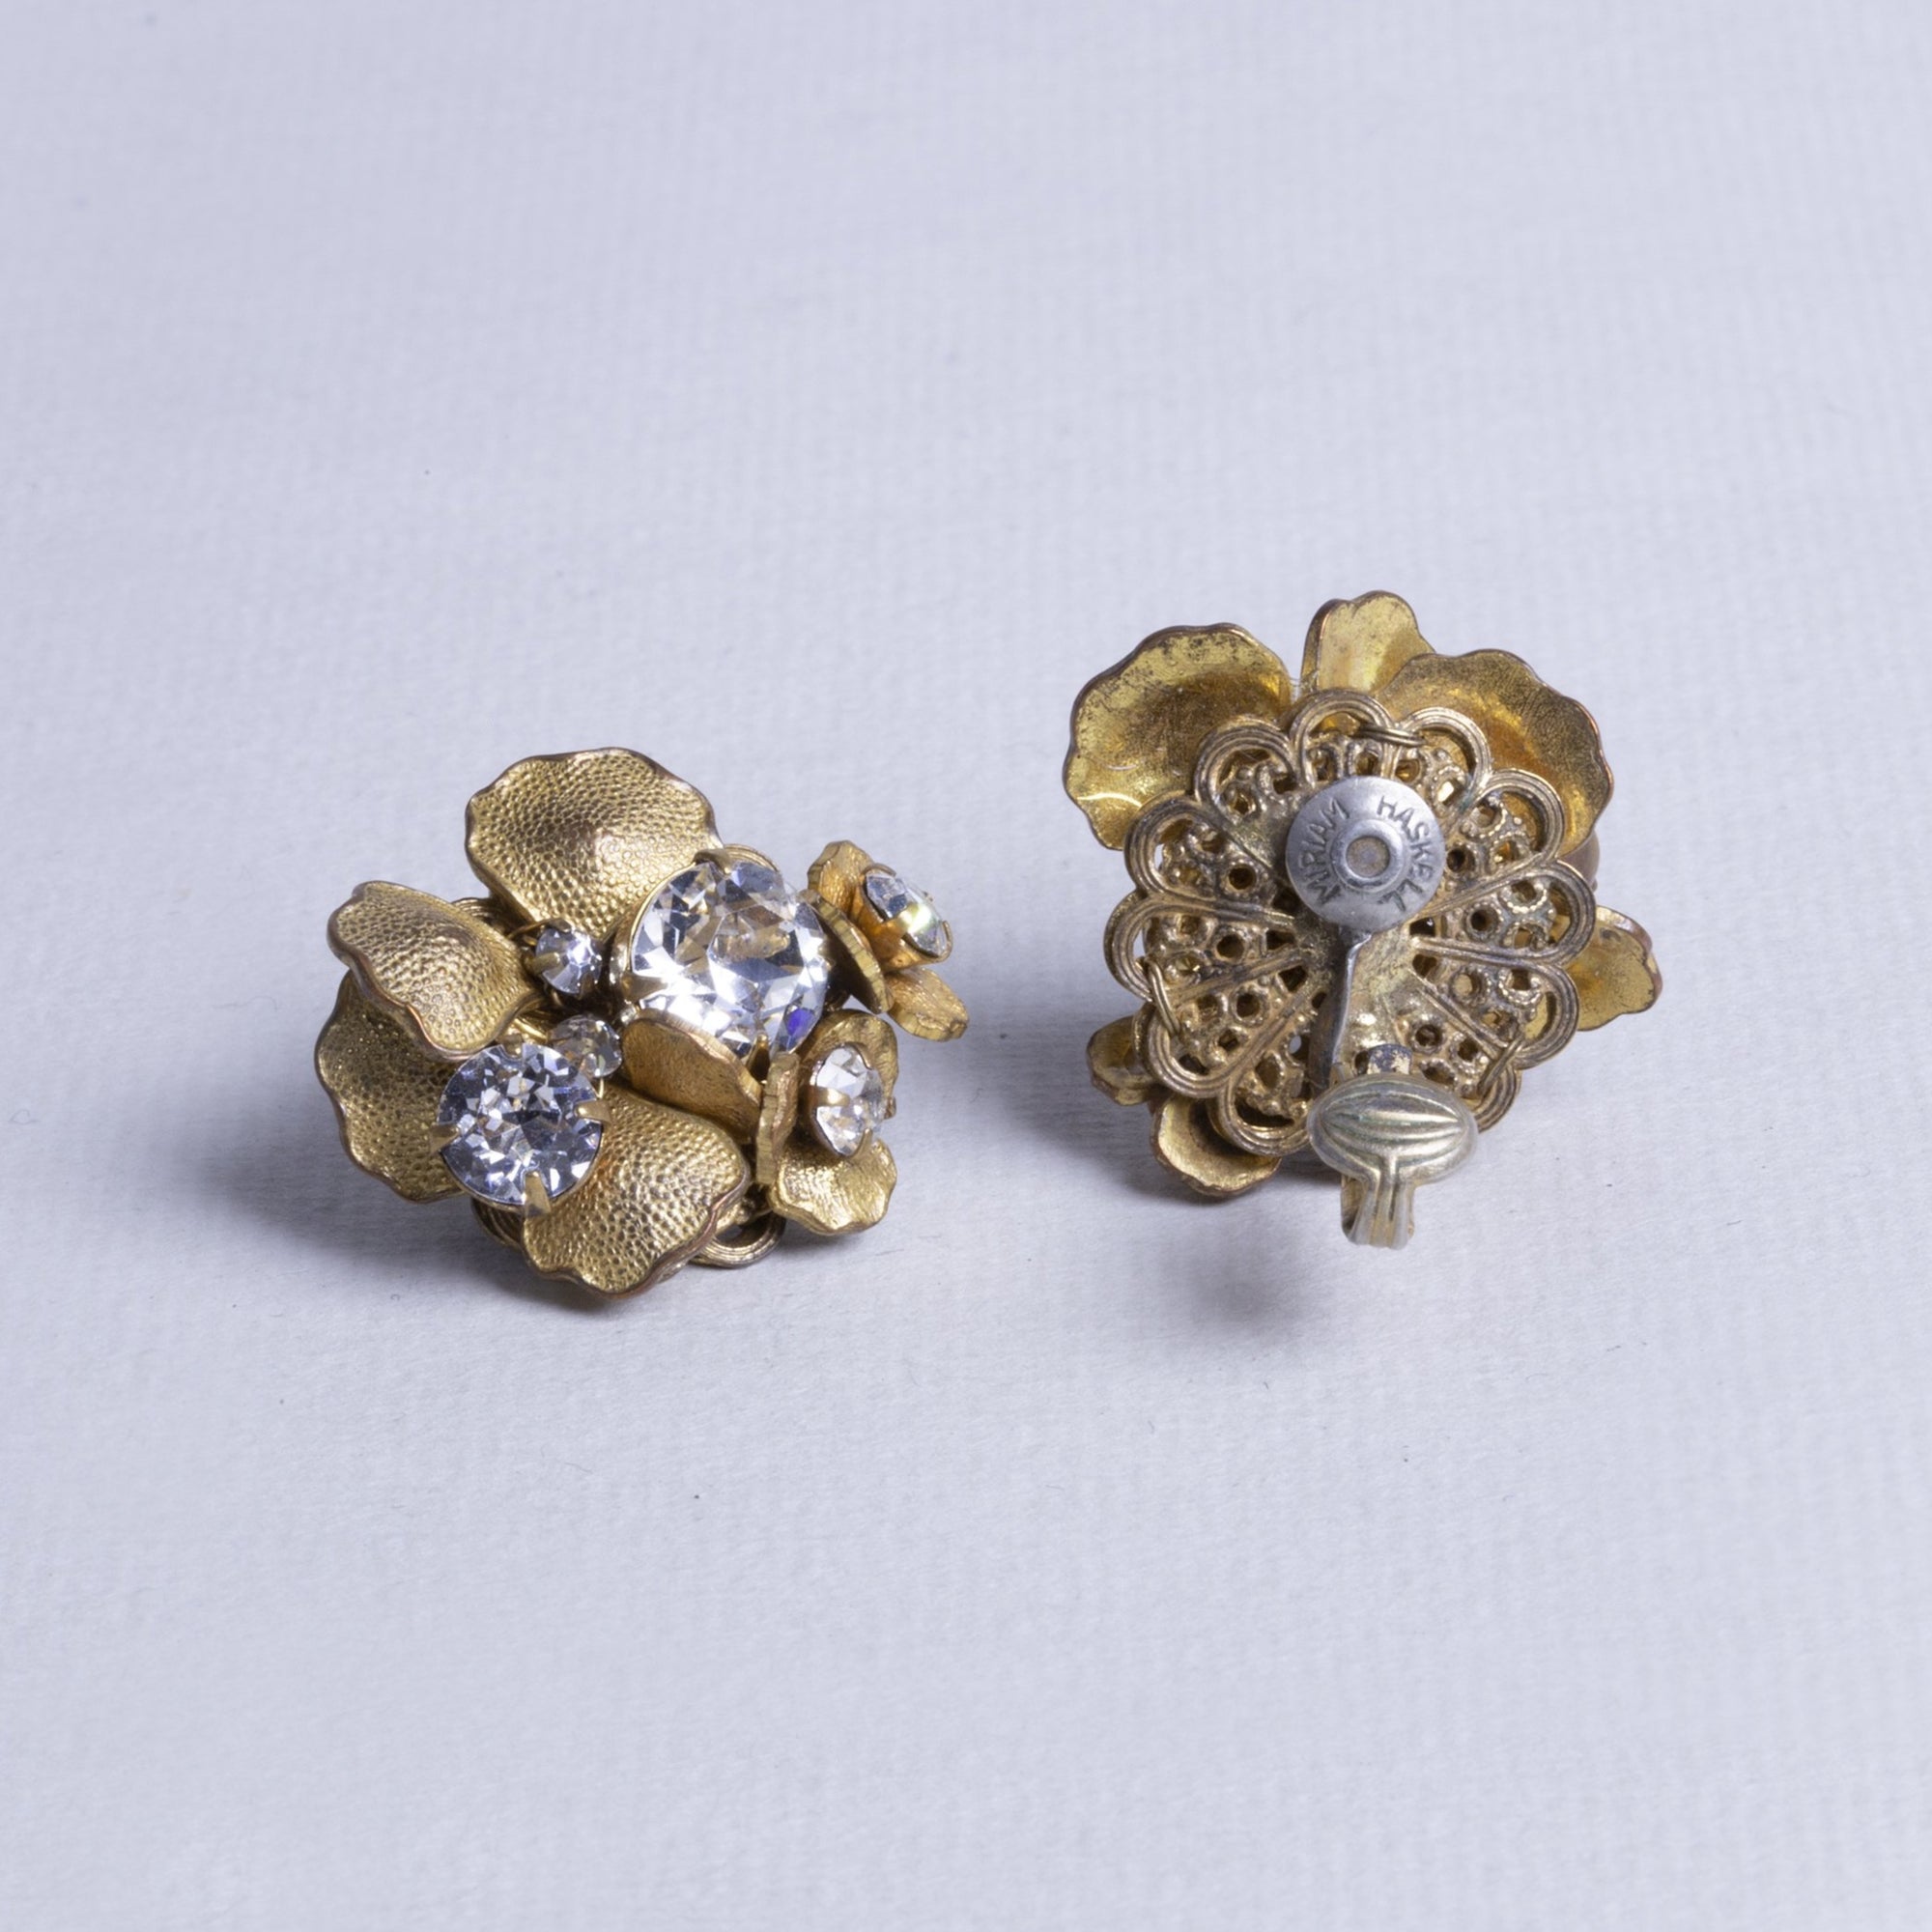 Vintage Clip-On Gold Earrings